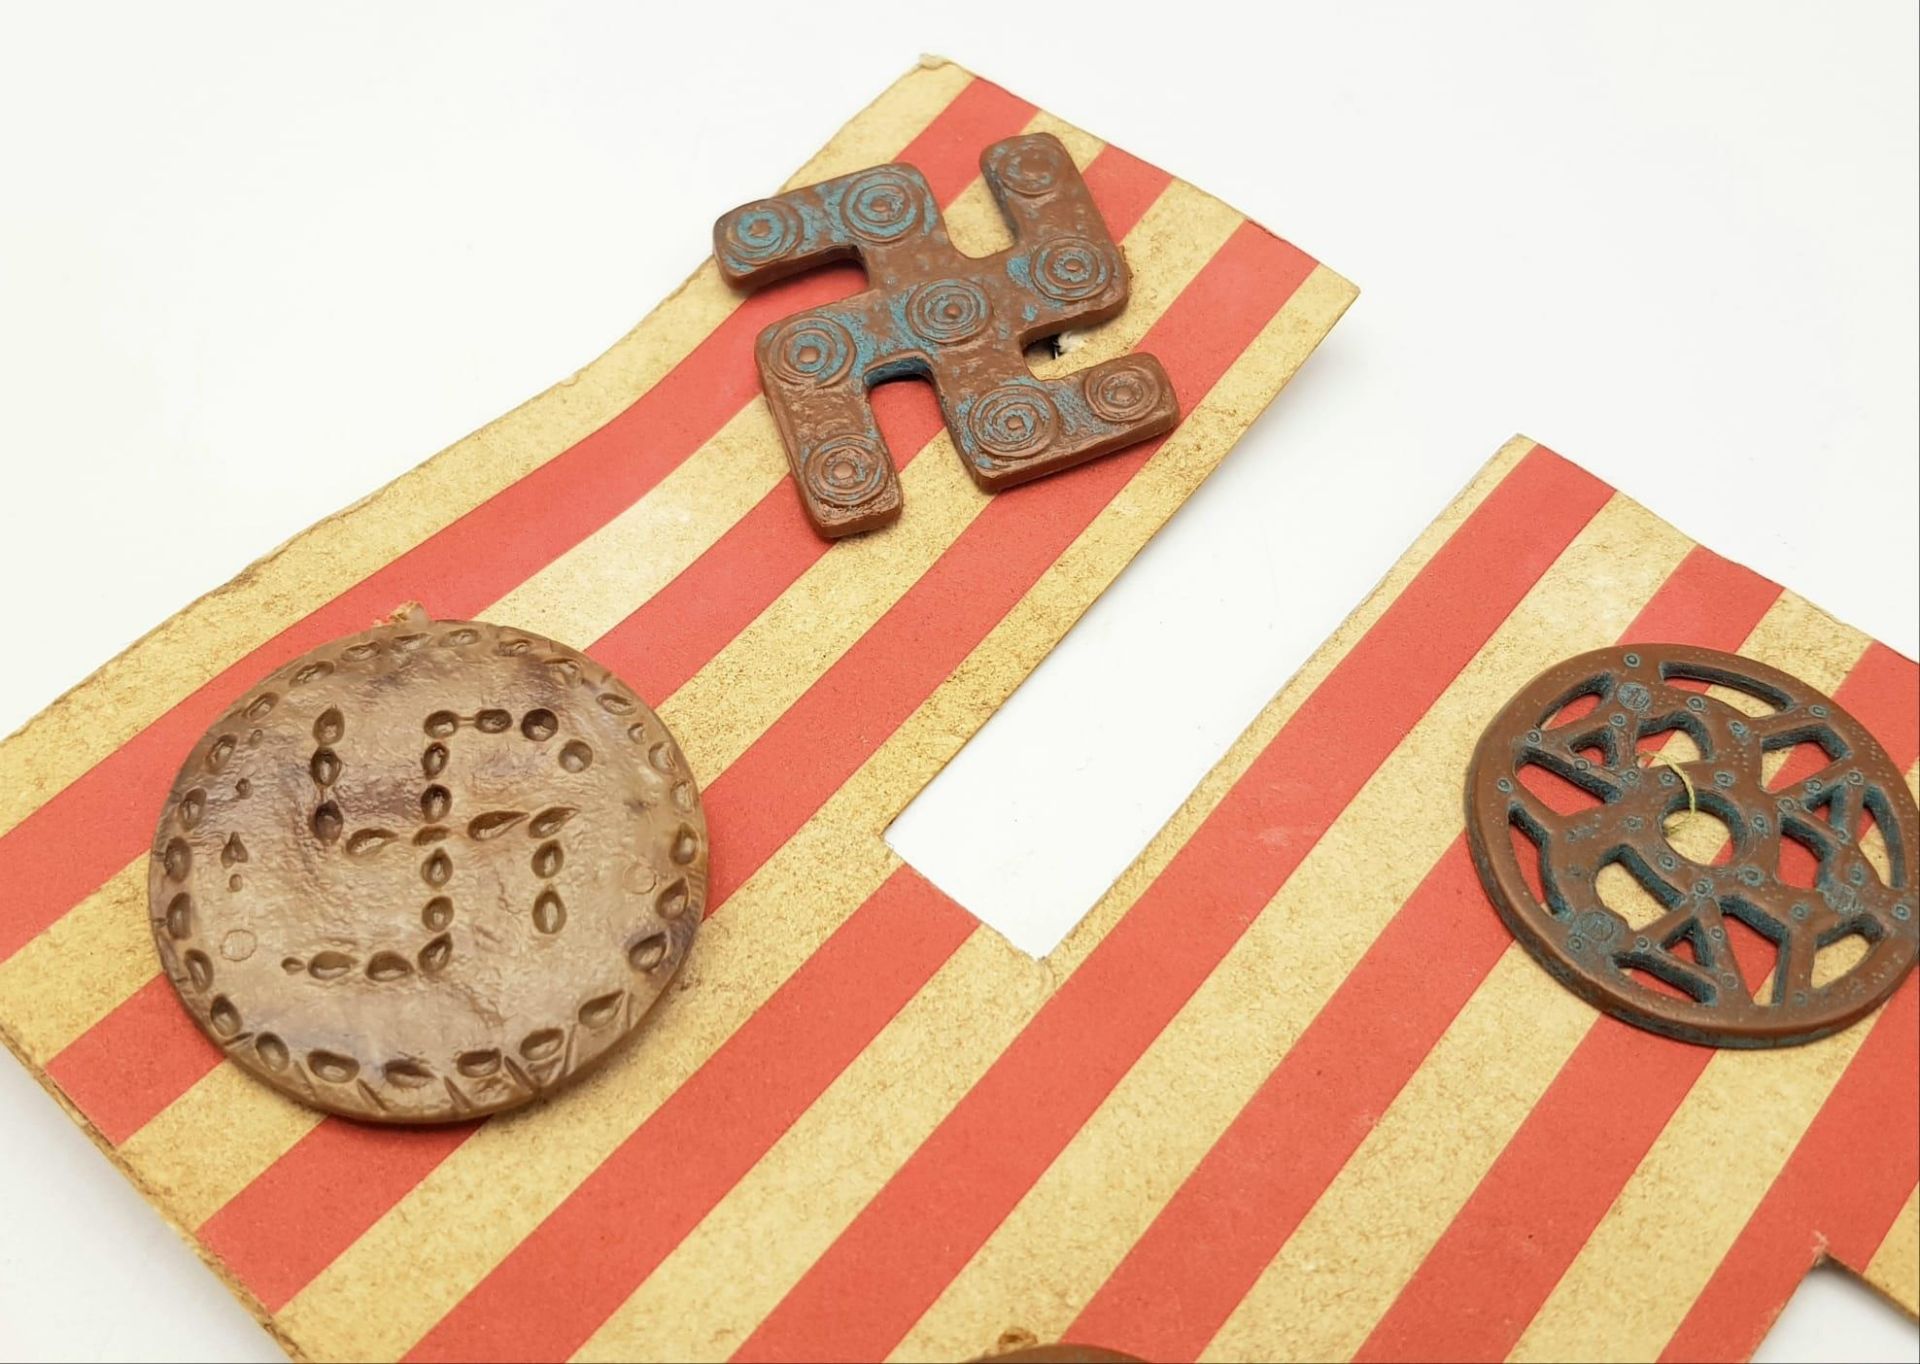 3rd Reich Archaeology Set of Winterhilf Tinnie Badges. The set of 9 badges are a portrayal of pre- - Bild 4 aus 5